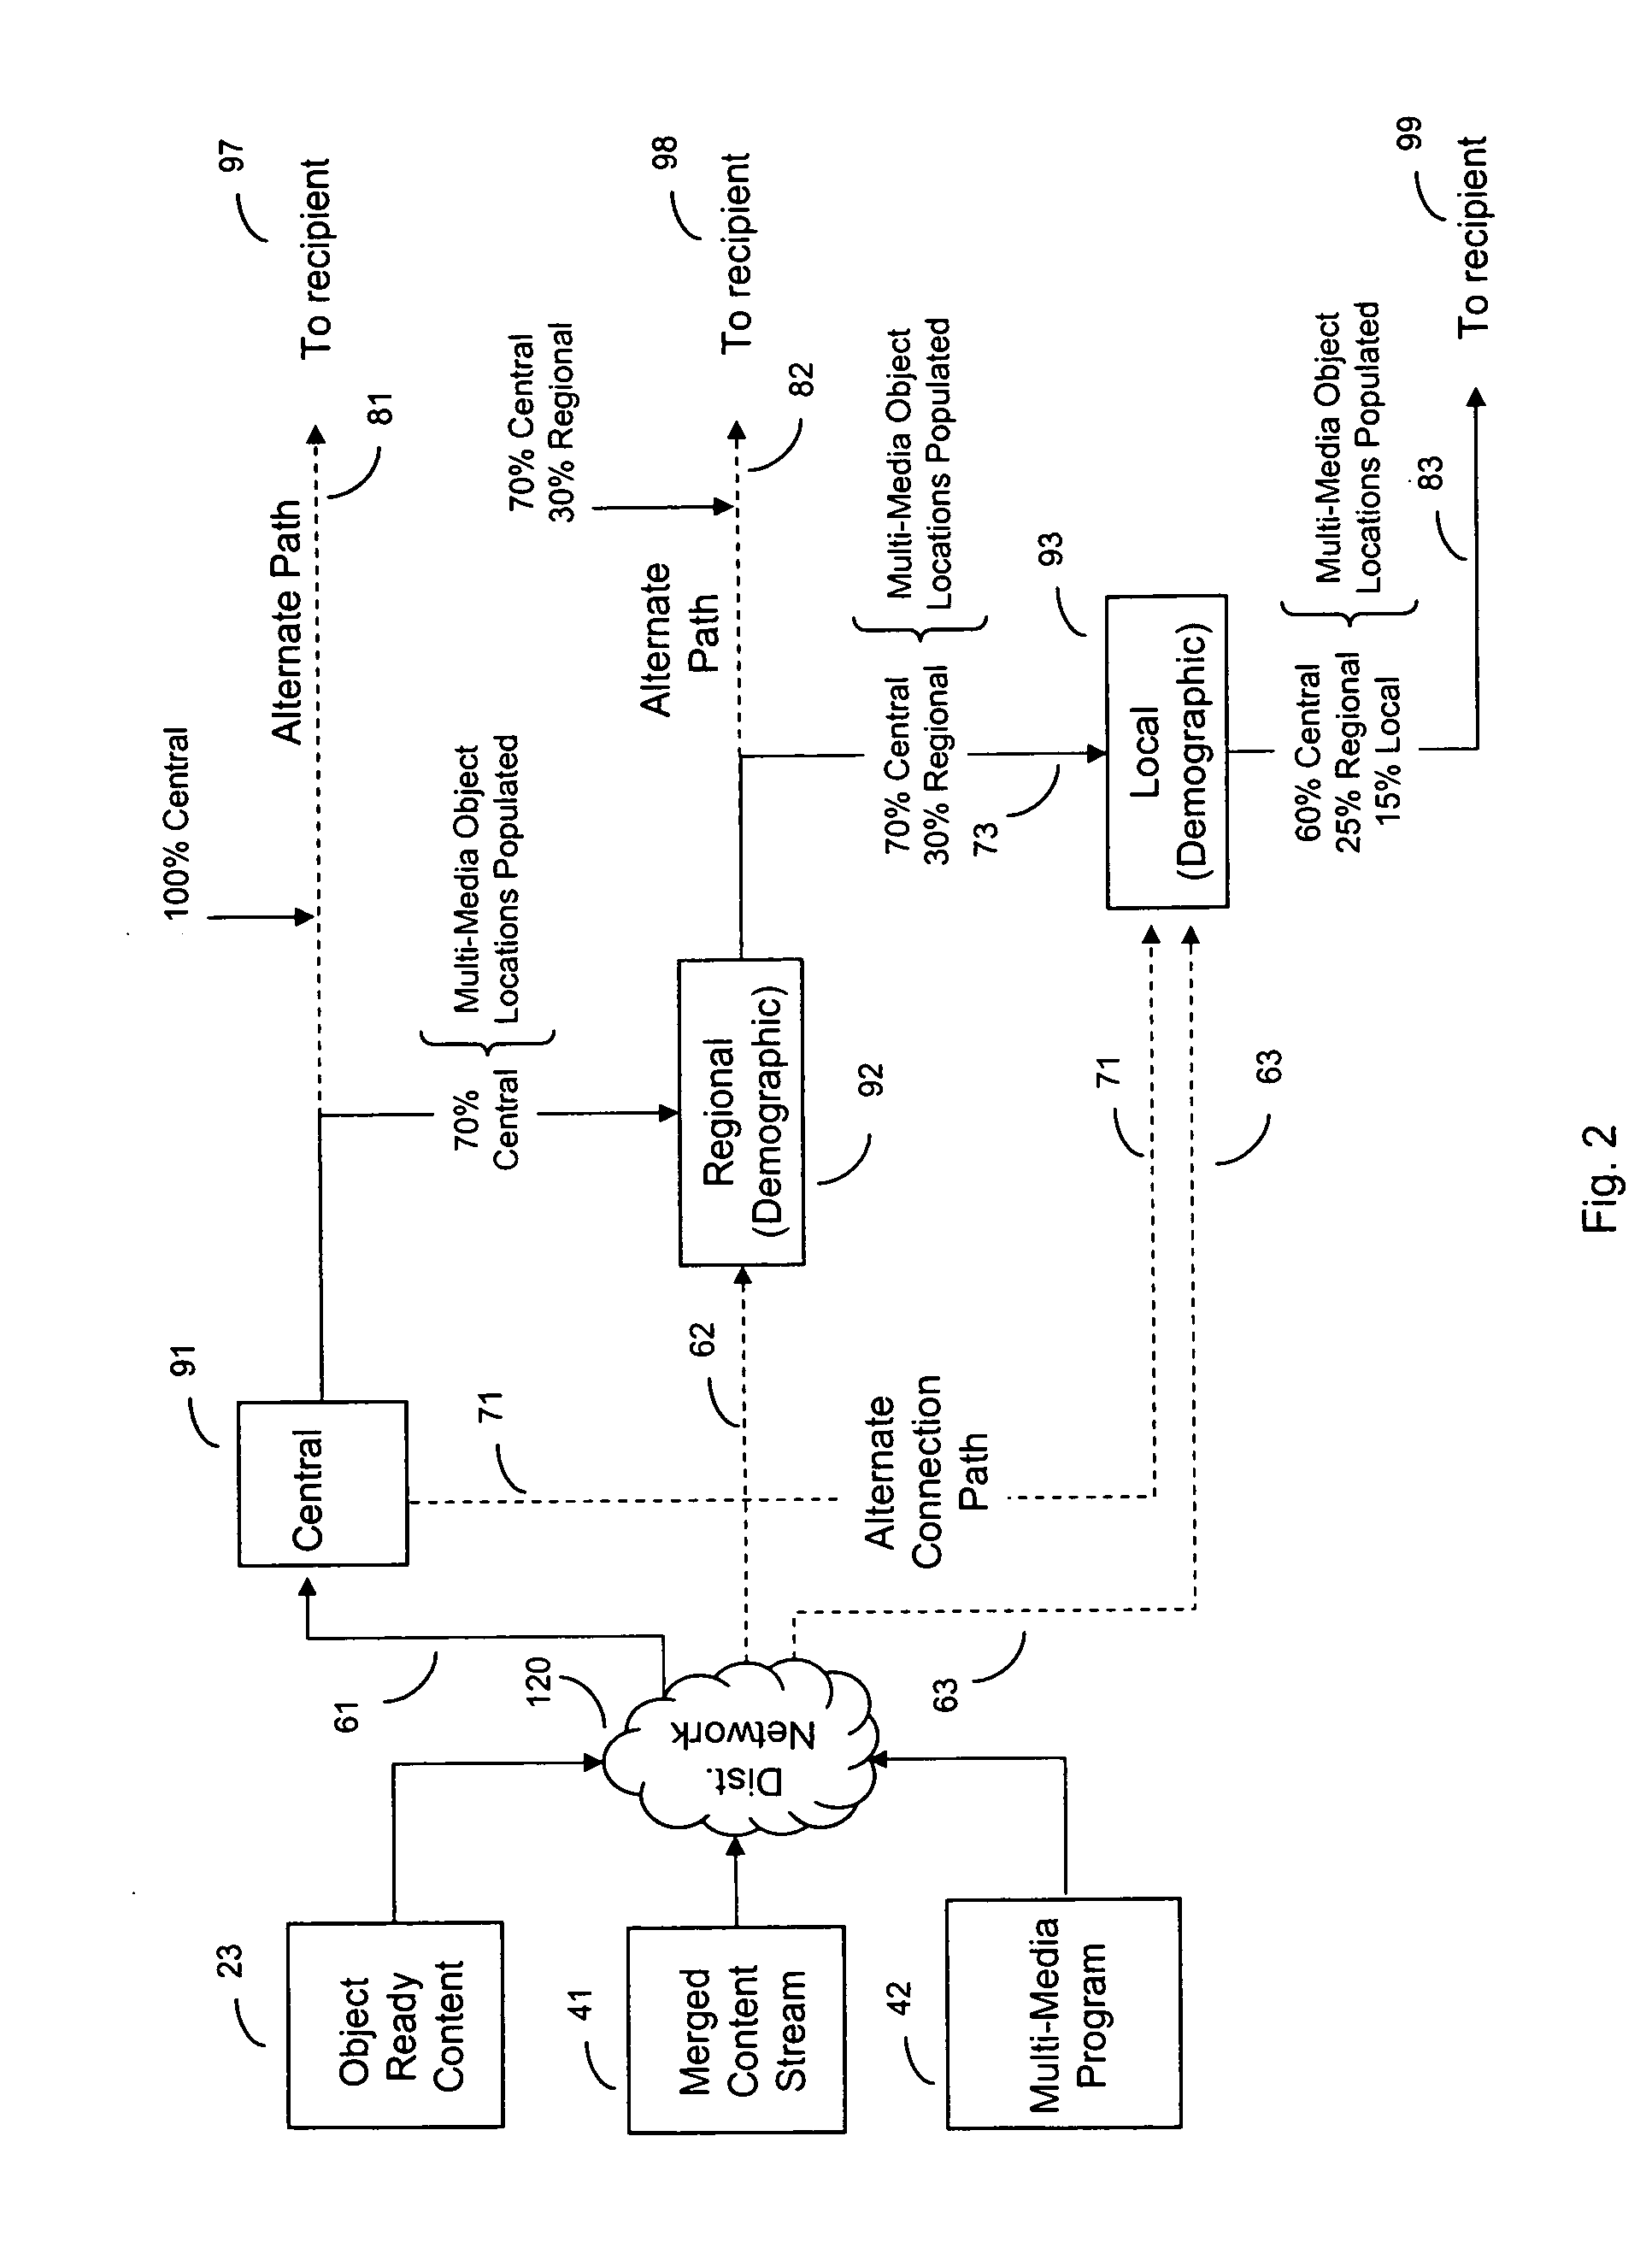 System for dynamic personalized object placement in a multi-media program